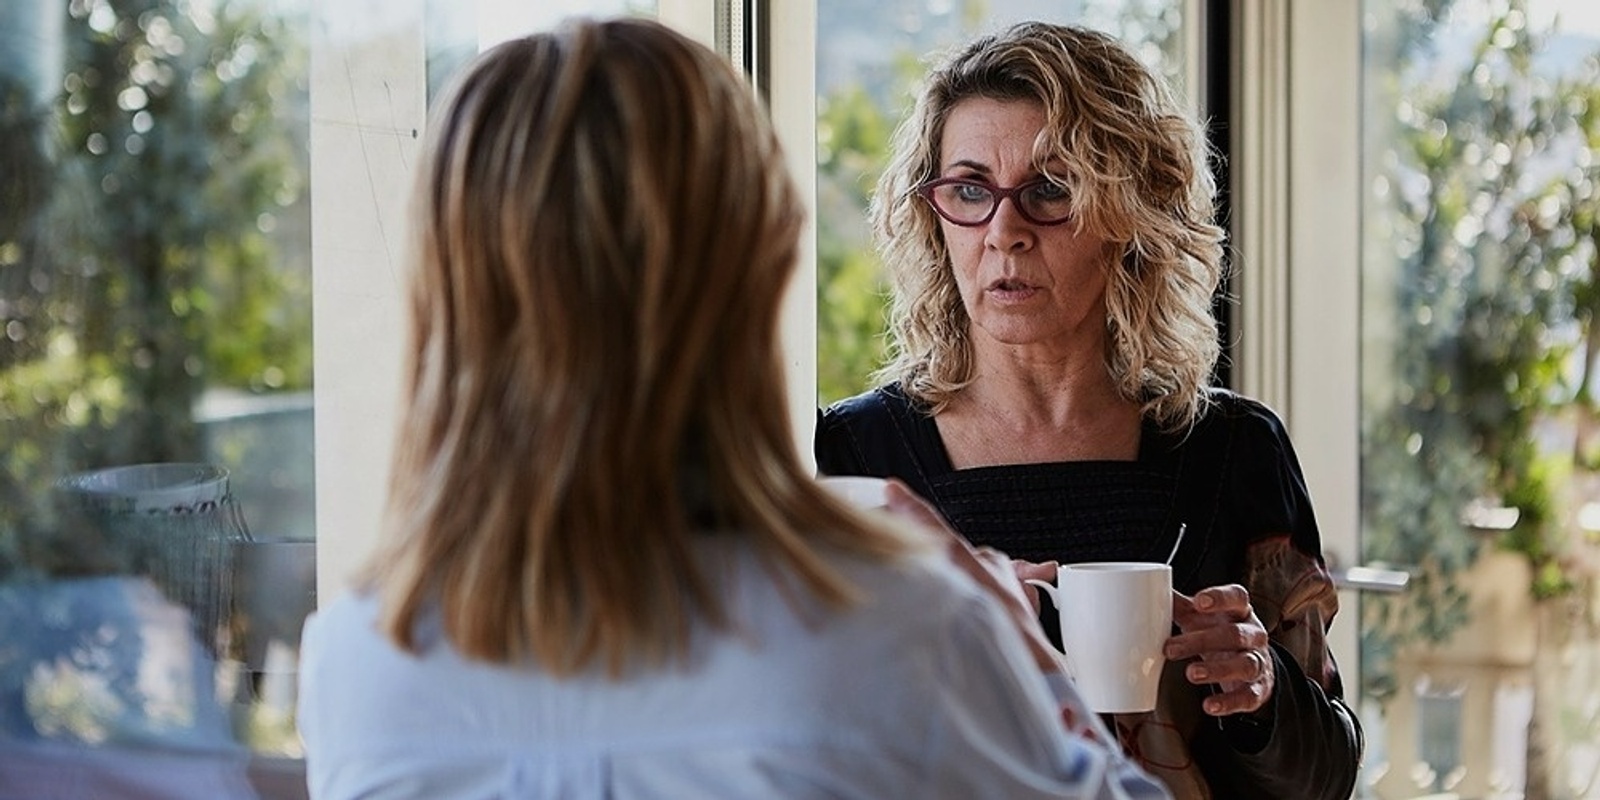 Banner image for Accidental Counsellor Training